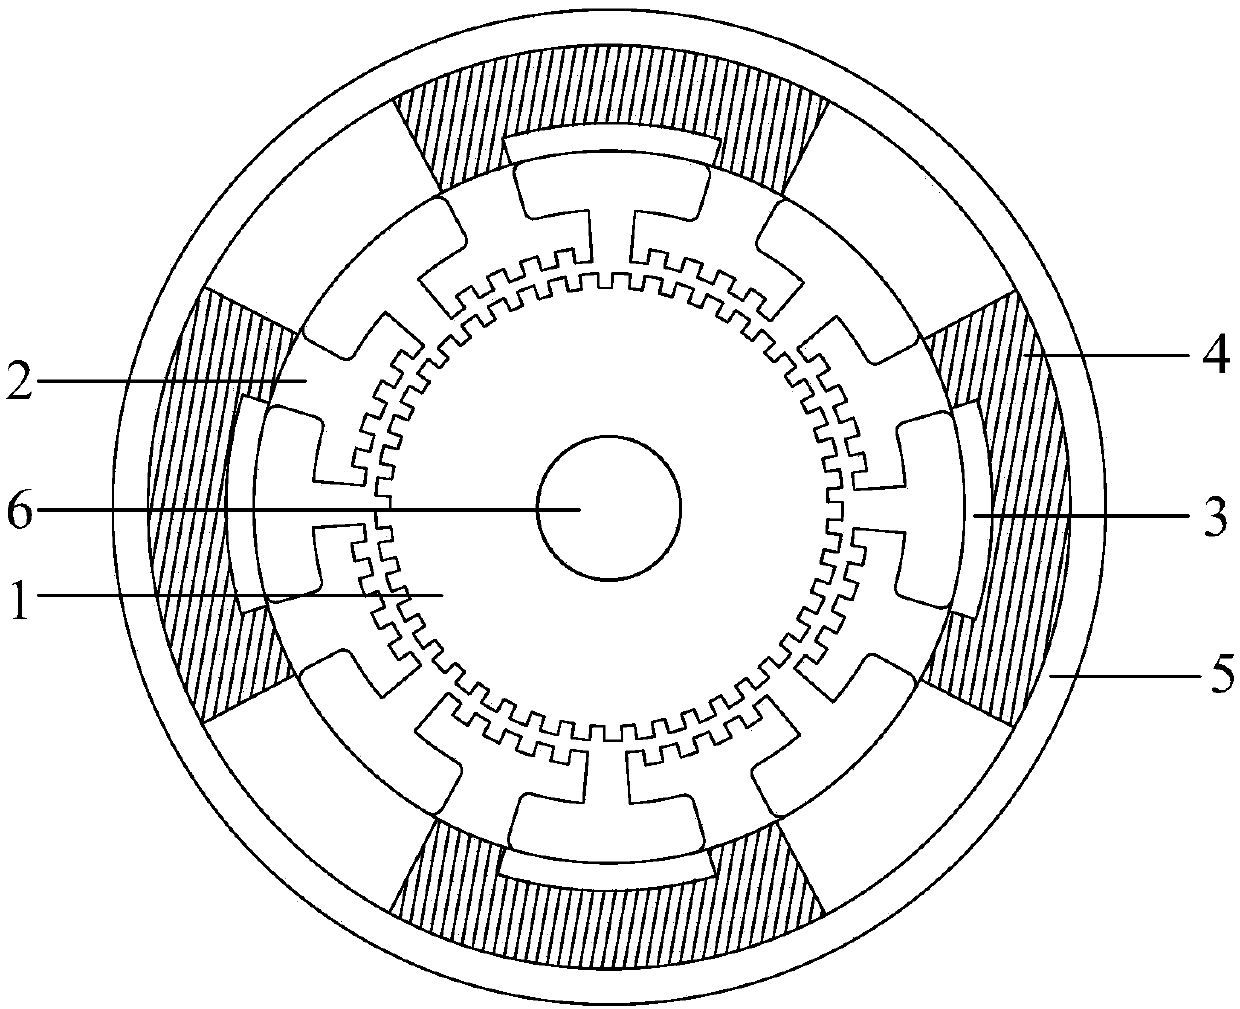 Hybrid stepping motor with U-shaped permanent magnets embedded into stator